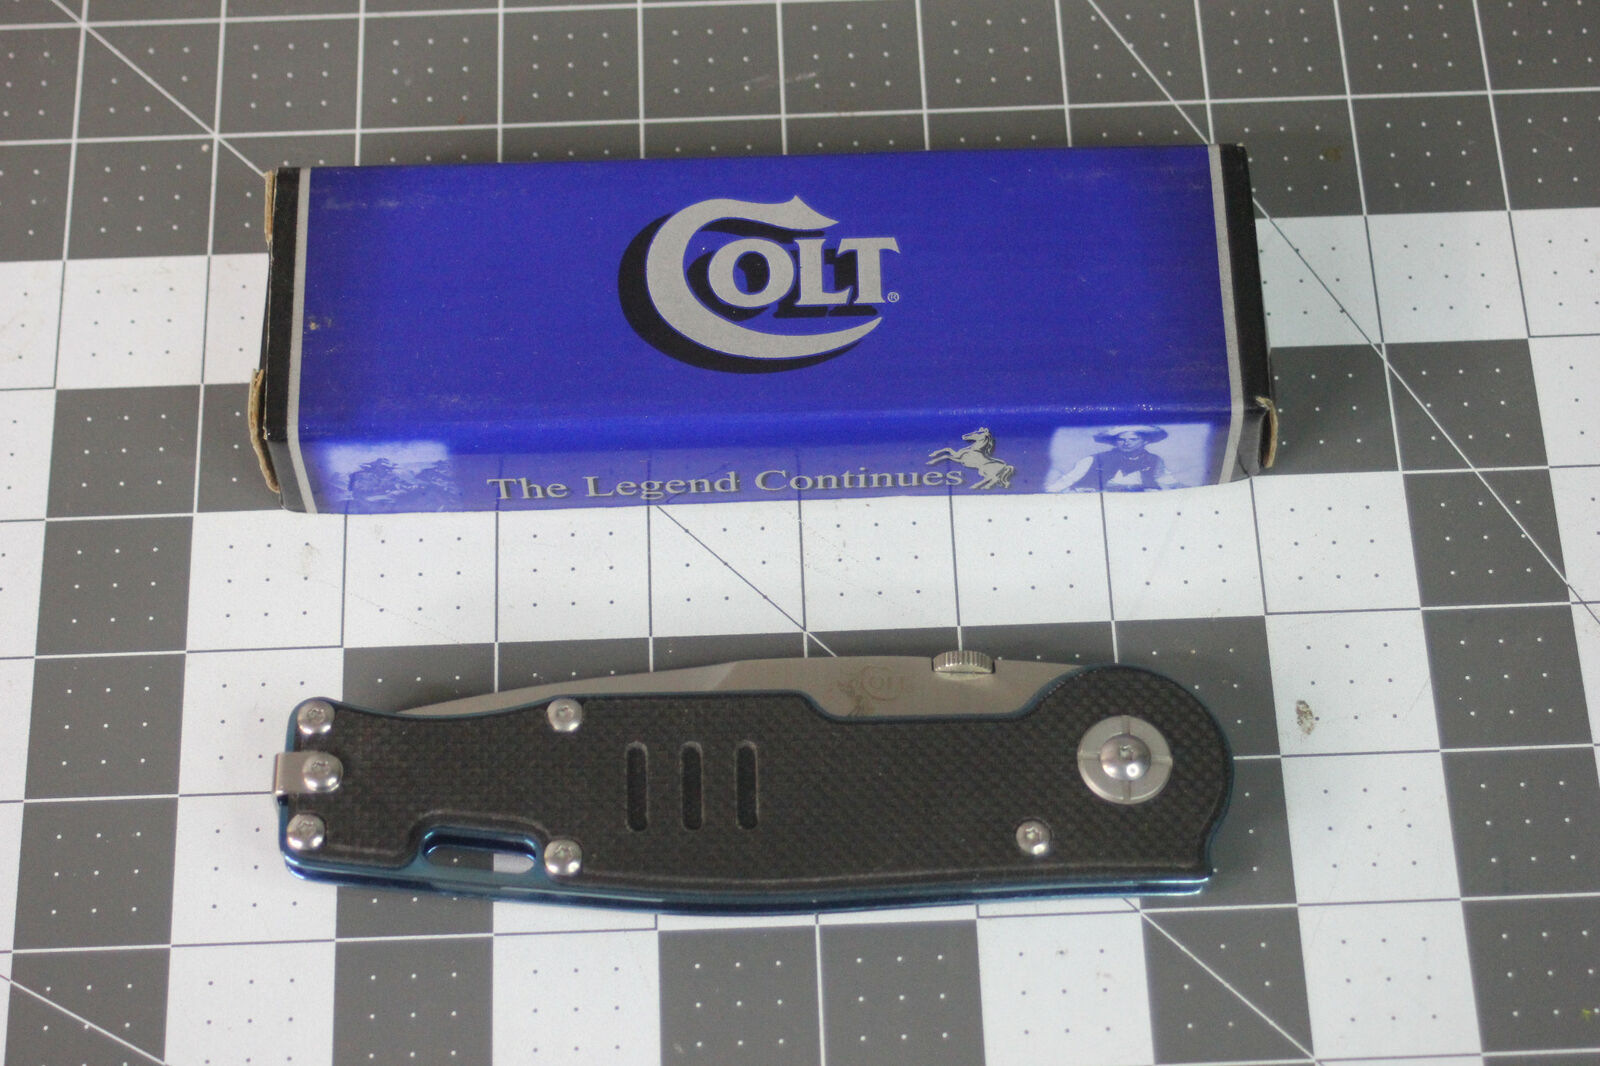 Colt CT531 Large Folding Tactical Knife New in Box